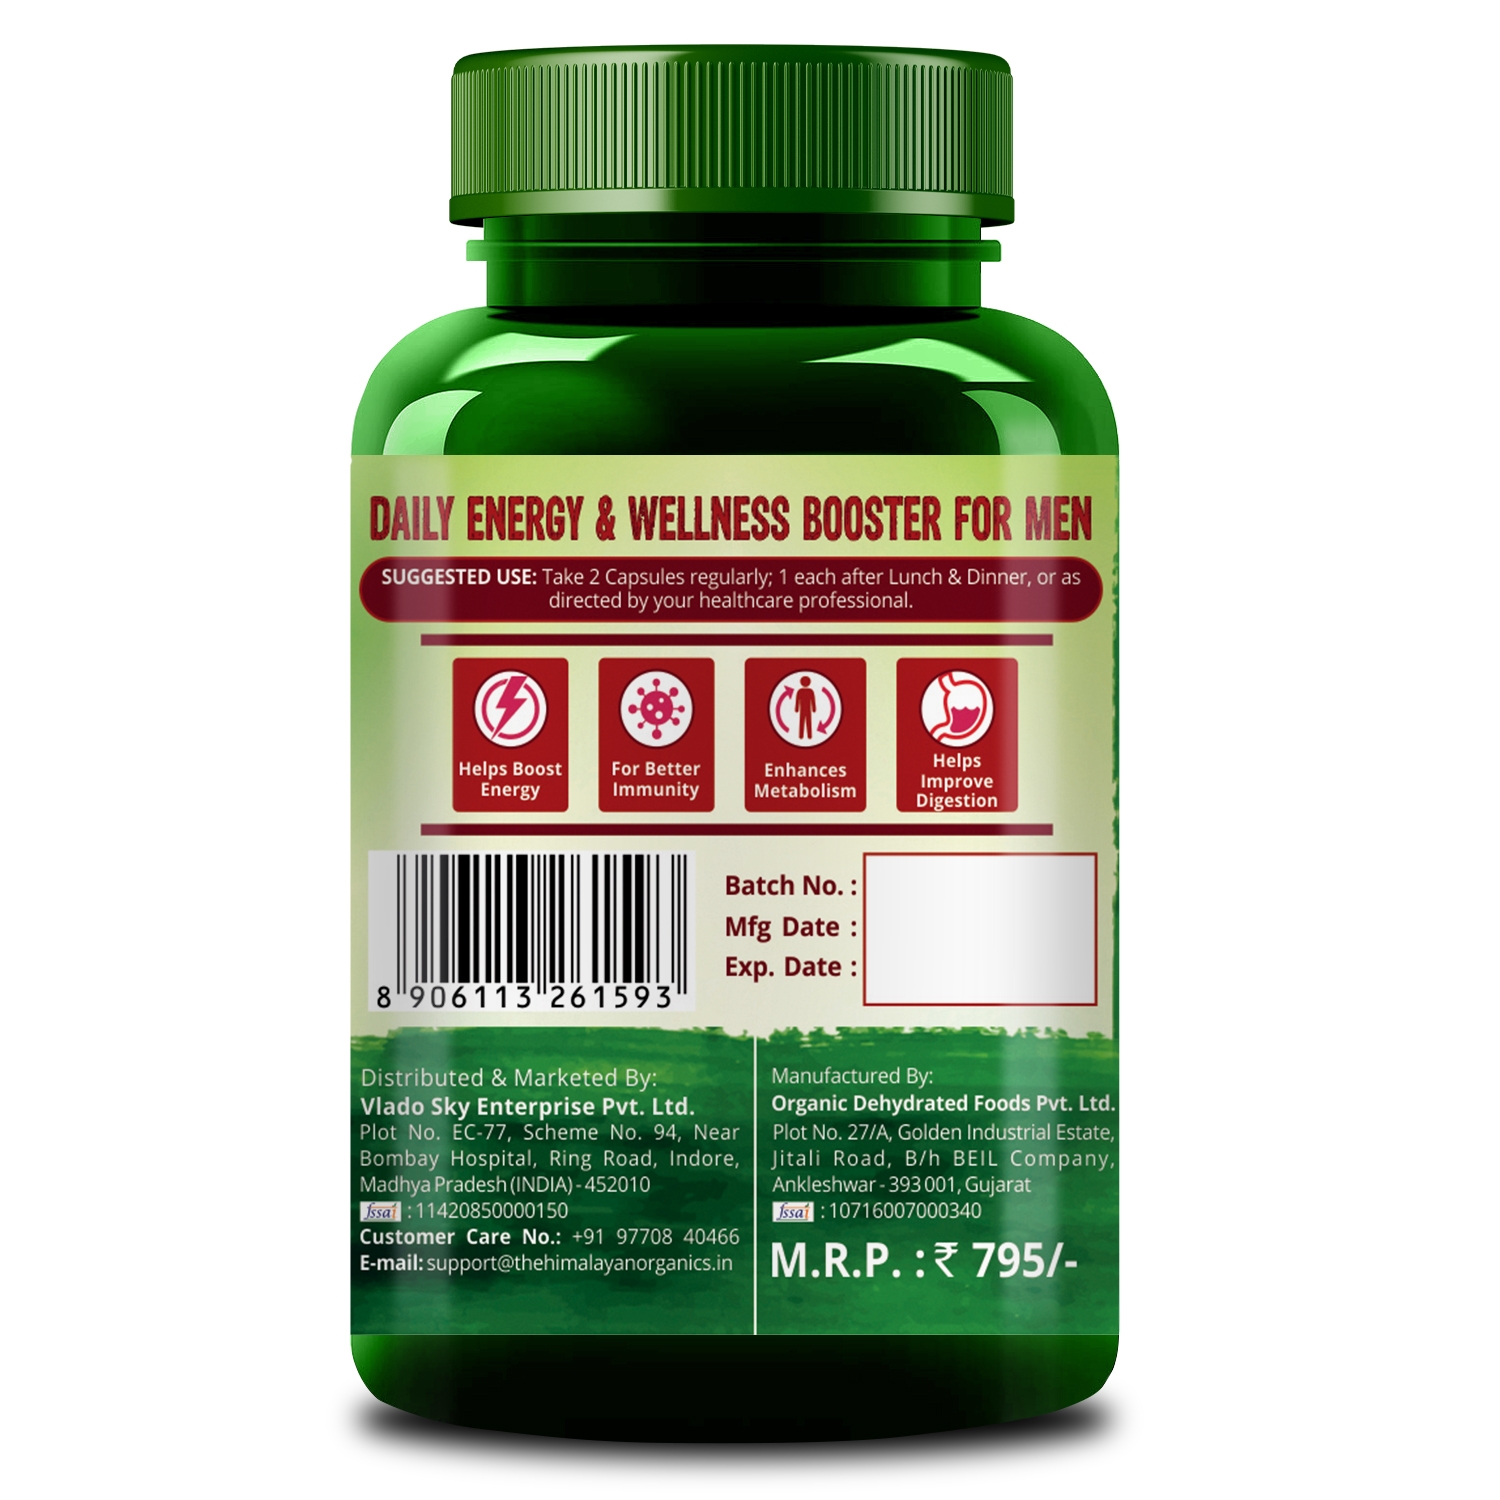 Himalayan Organics | Himalayan Organics Whole Food Multivitamin for Men || With Natural Vitamins, Minerals, Extracts || Best for Energy, Brain, Heart Health & Eye Health || 60 Veg Capsules 2